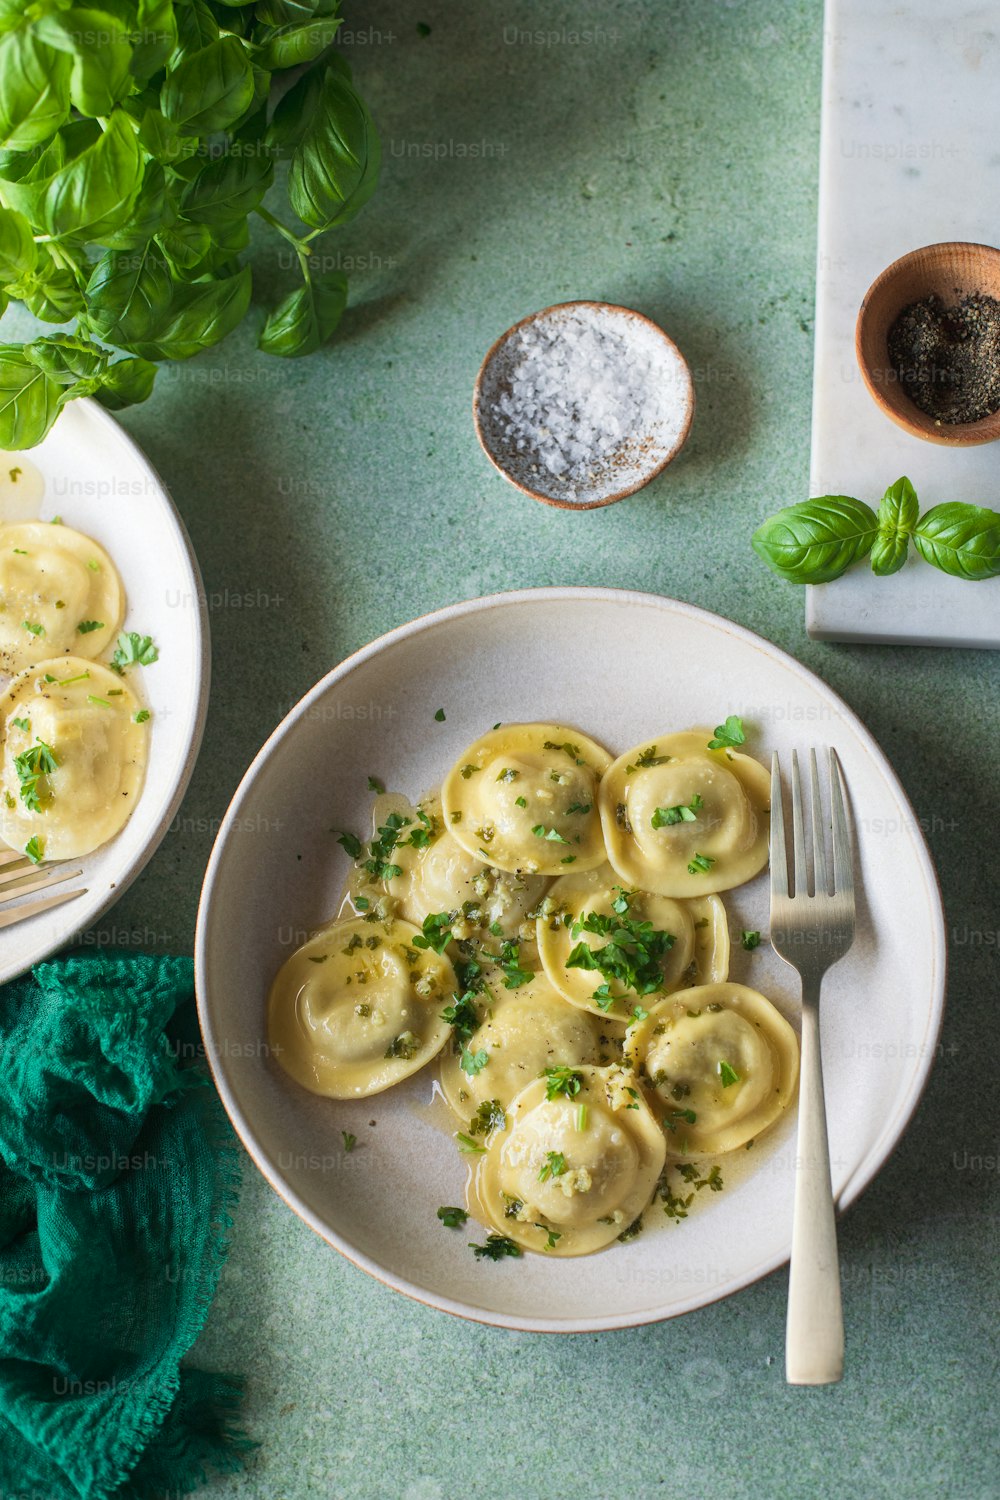 a plate of ravioli with parsley on the side